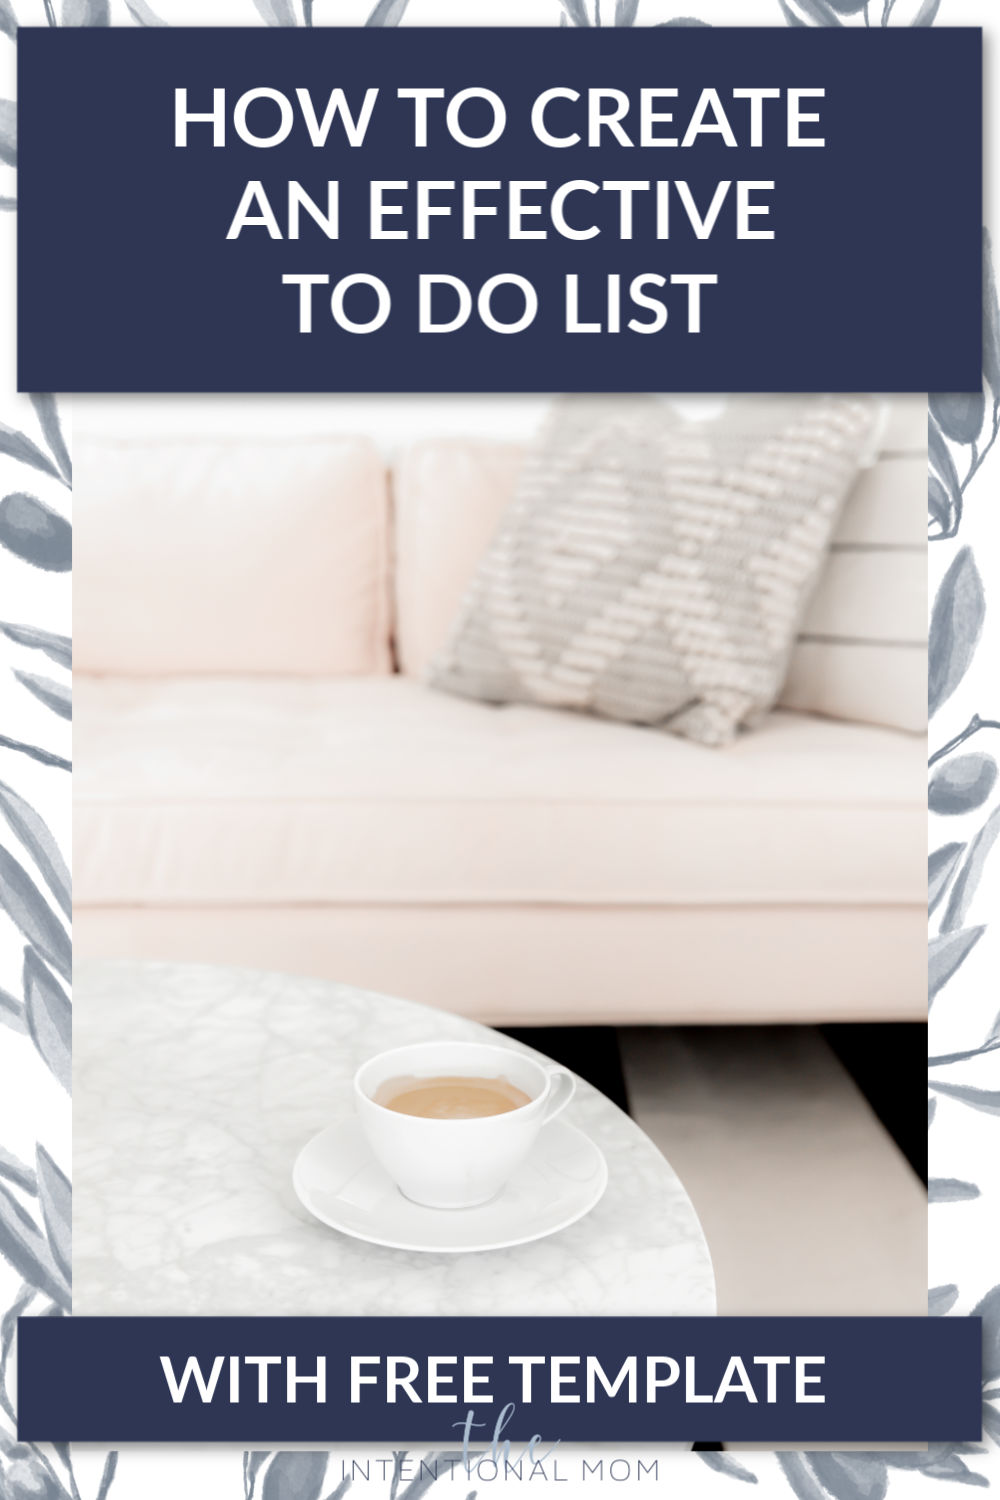 How to Create an Effective Daily To-Do List – Free Template